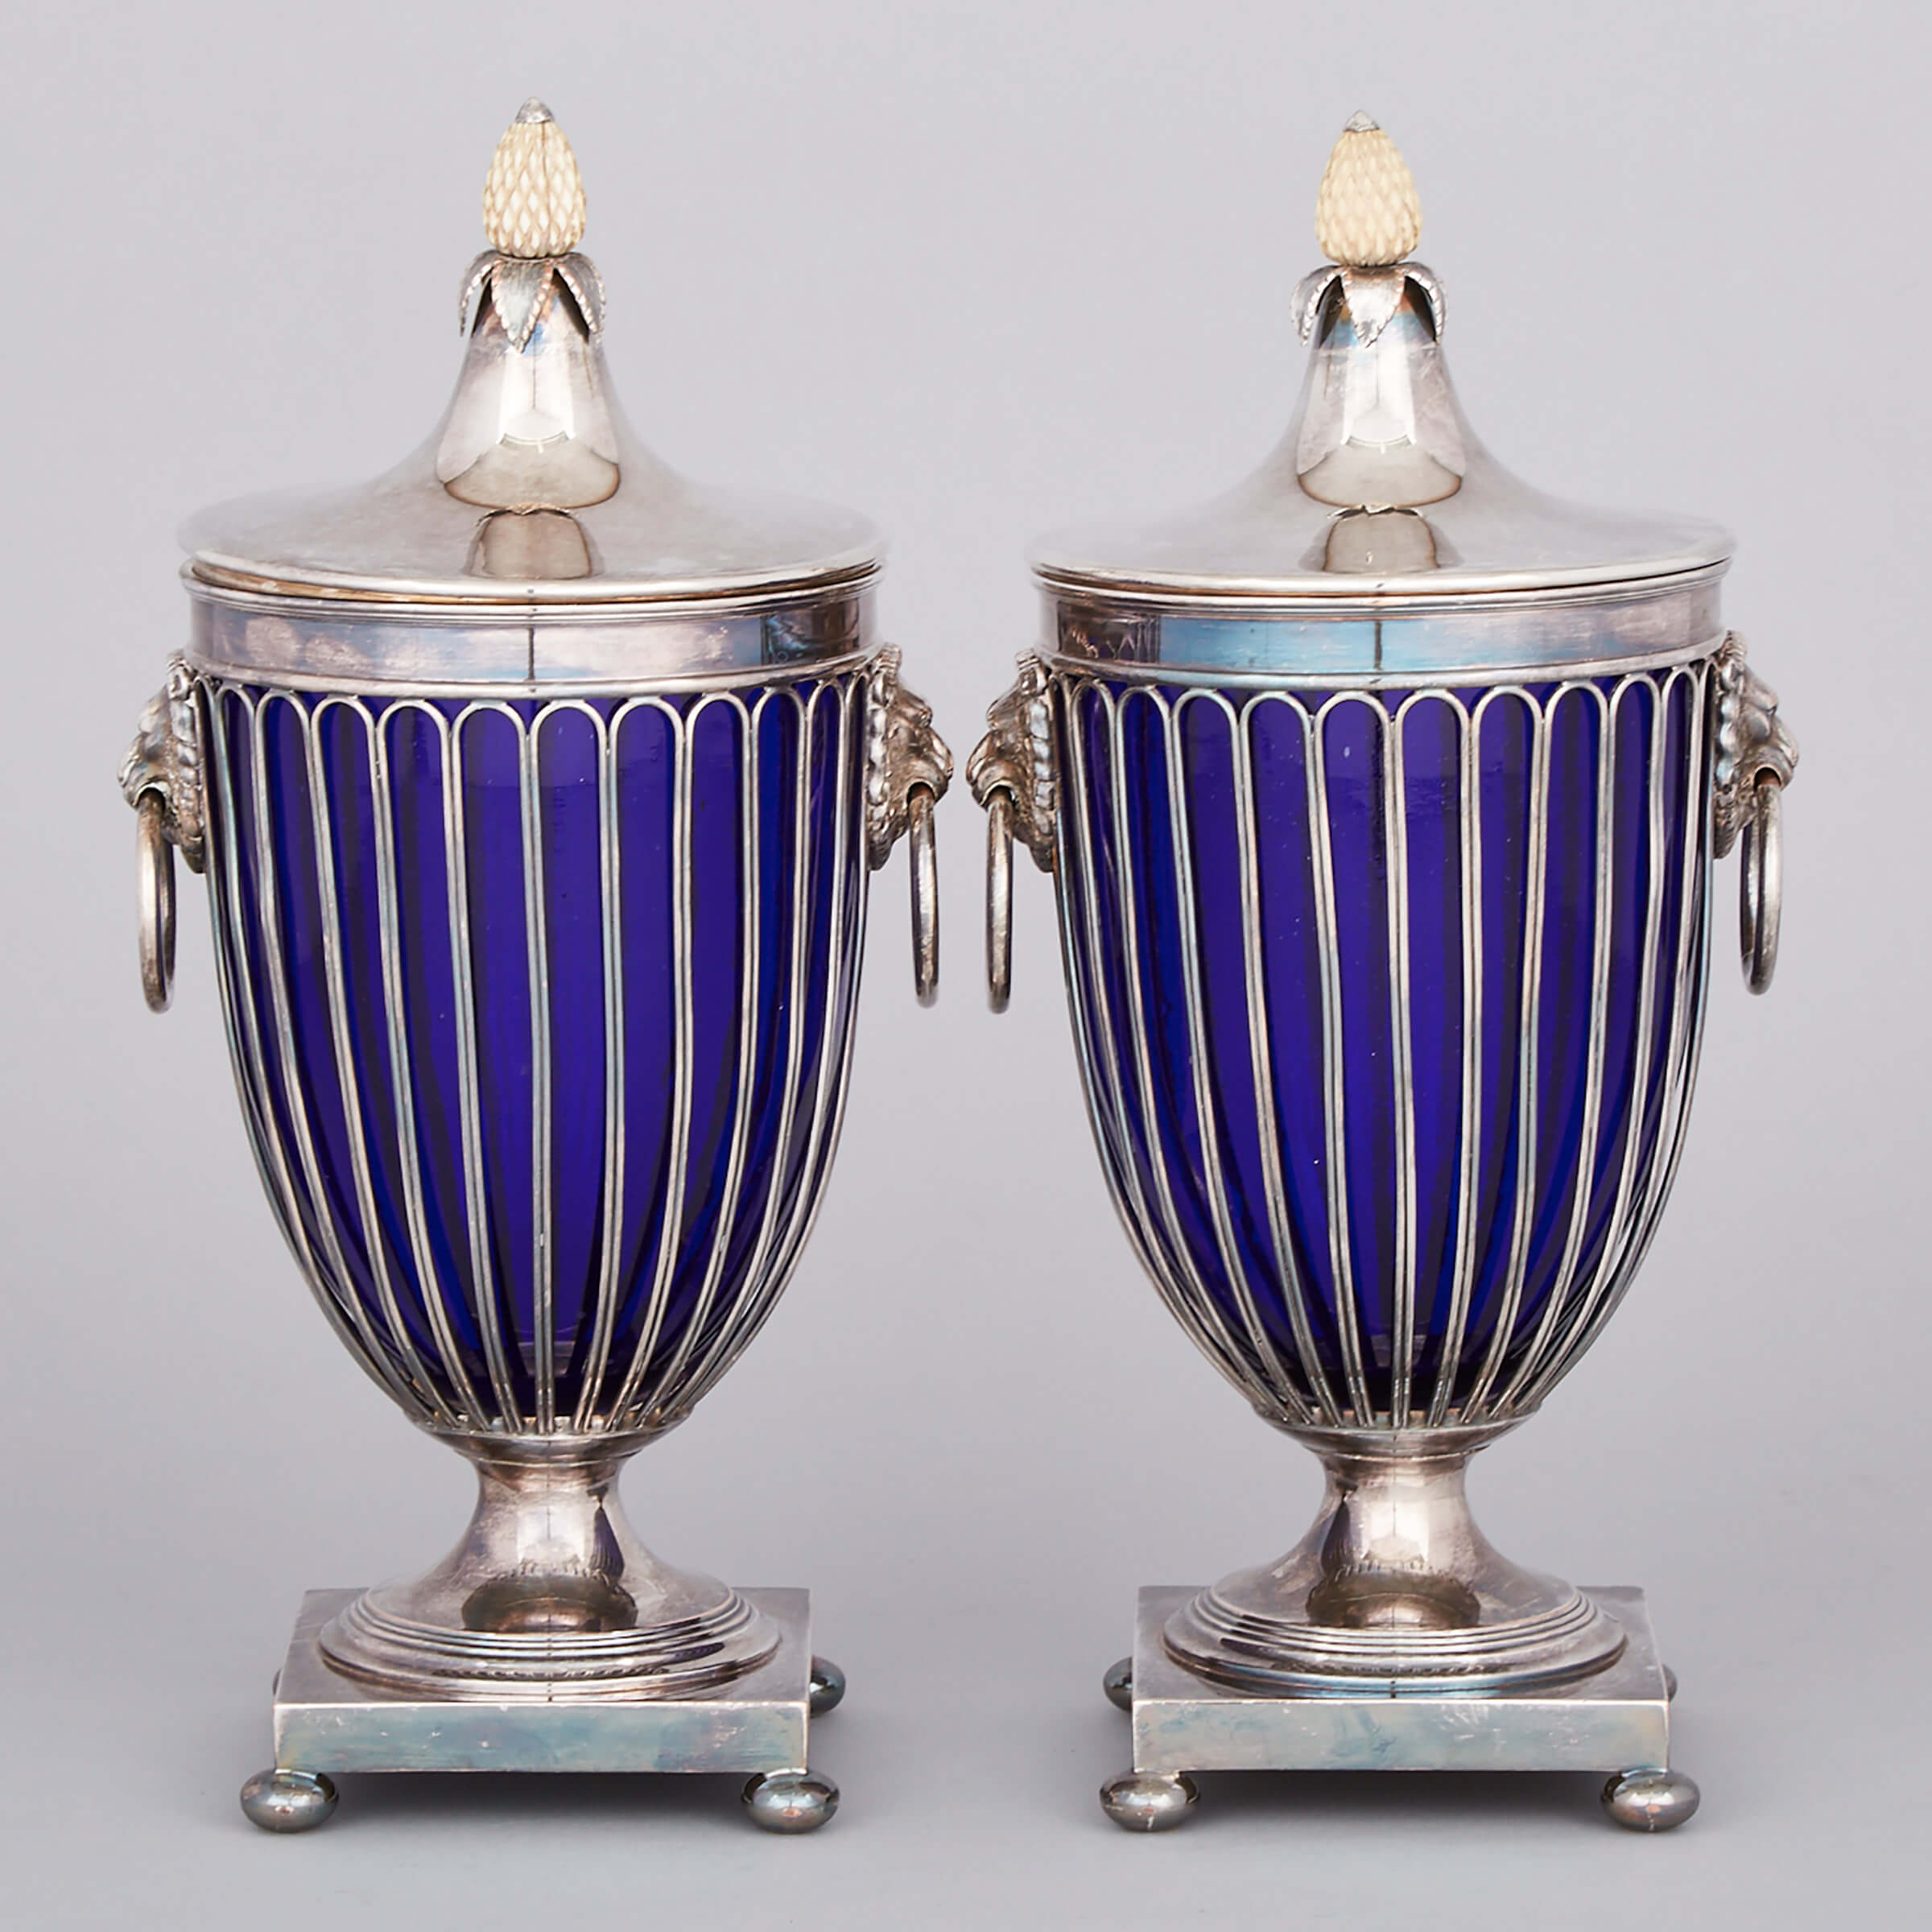 Pair of English Silver Plated Covered Urns, Barker Ellis Silver Co., 20th century